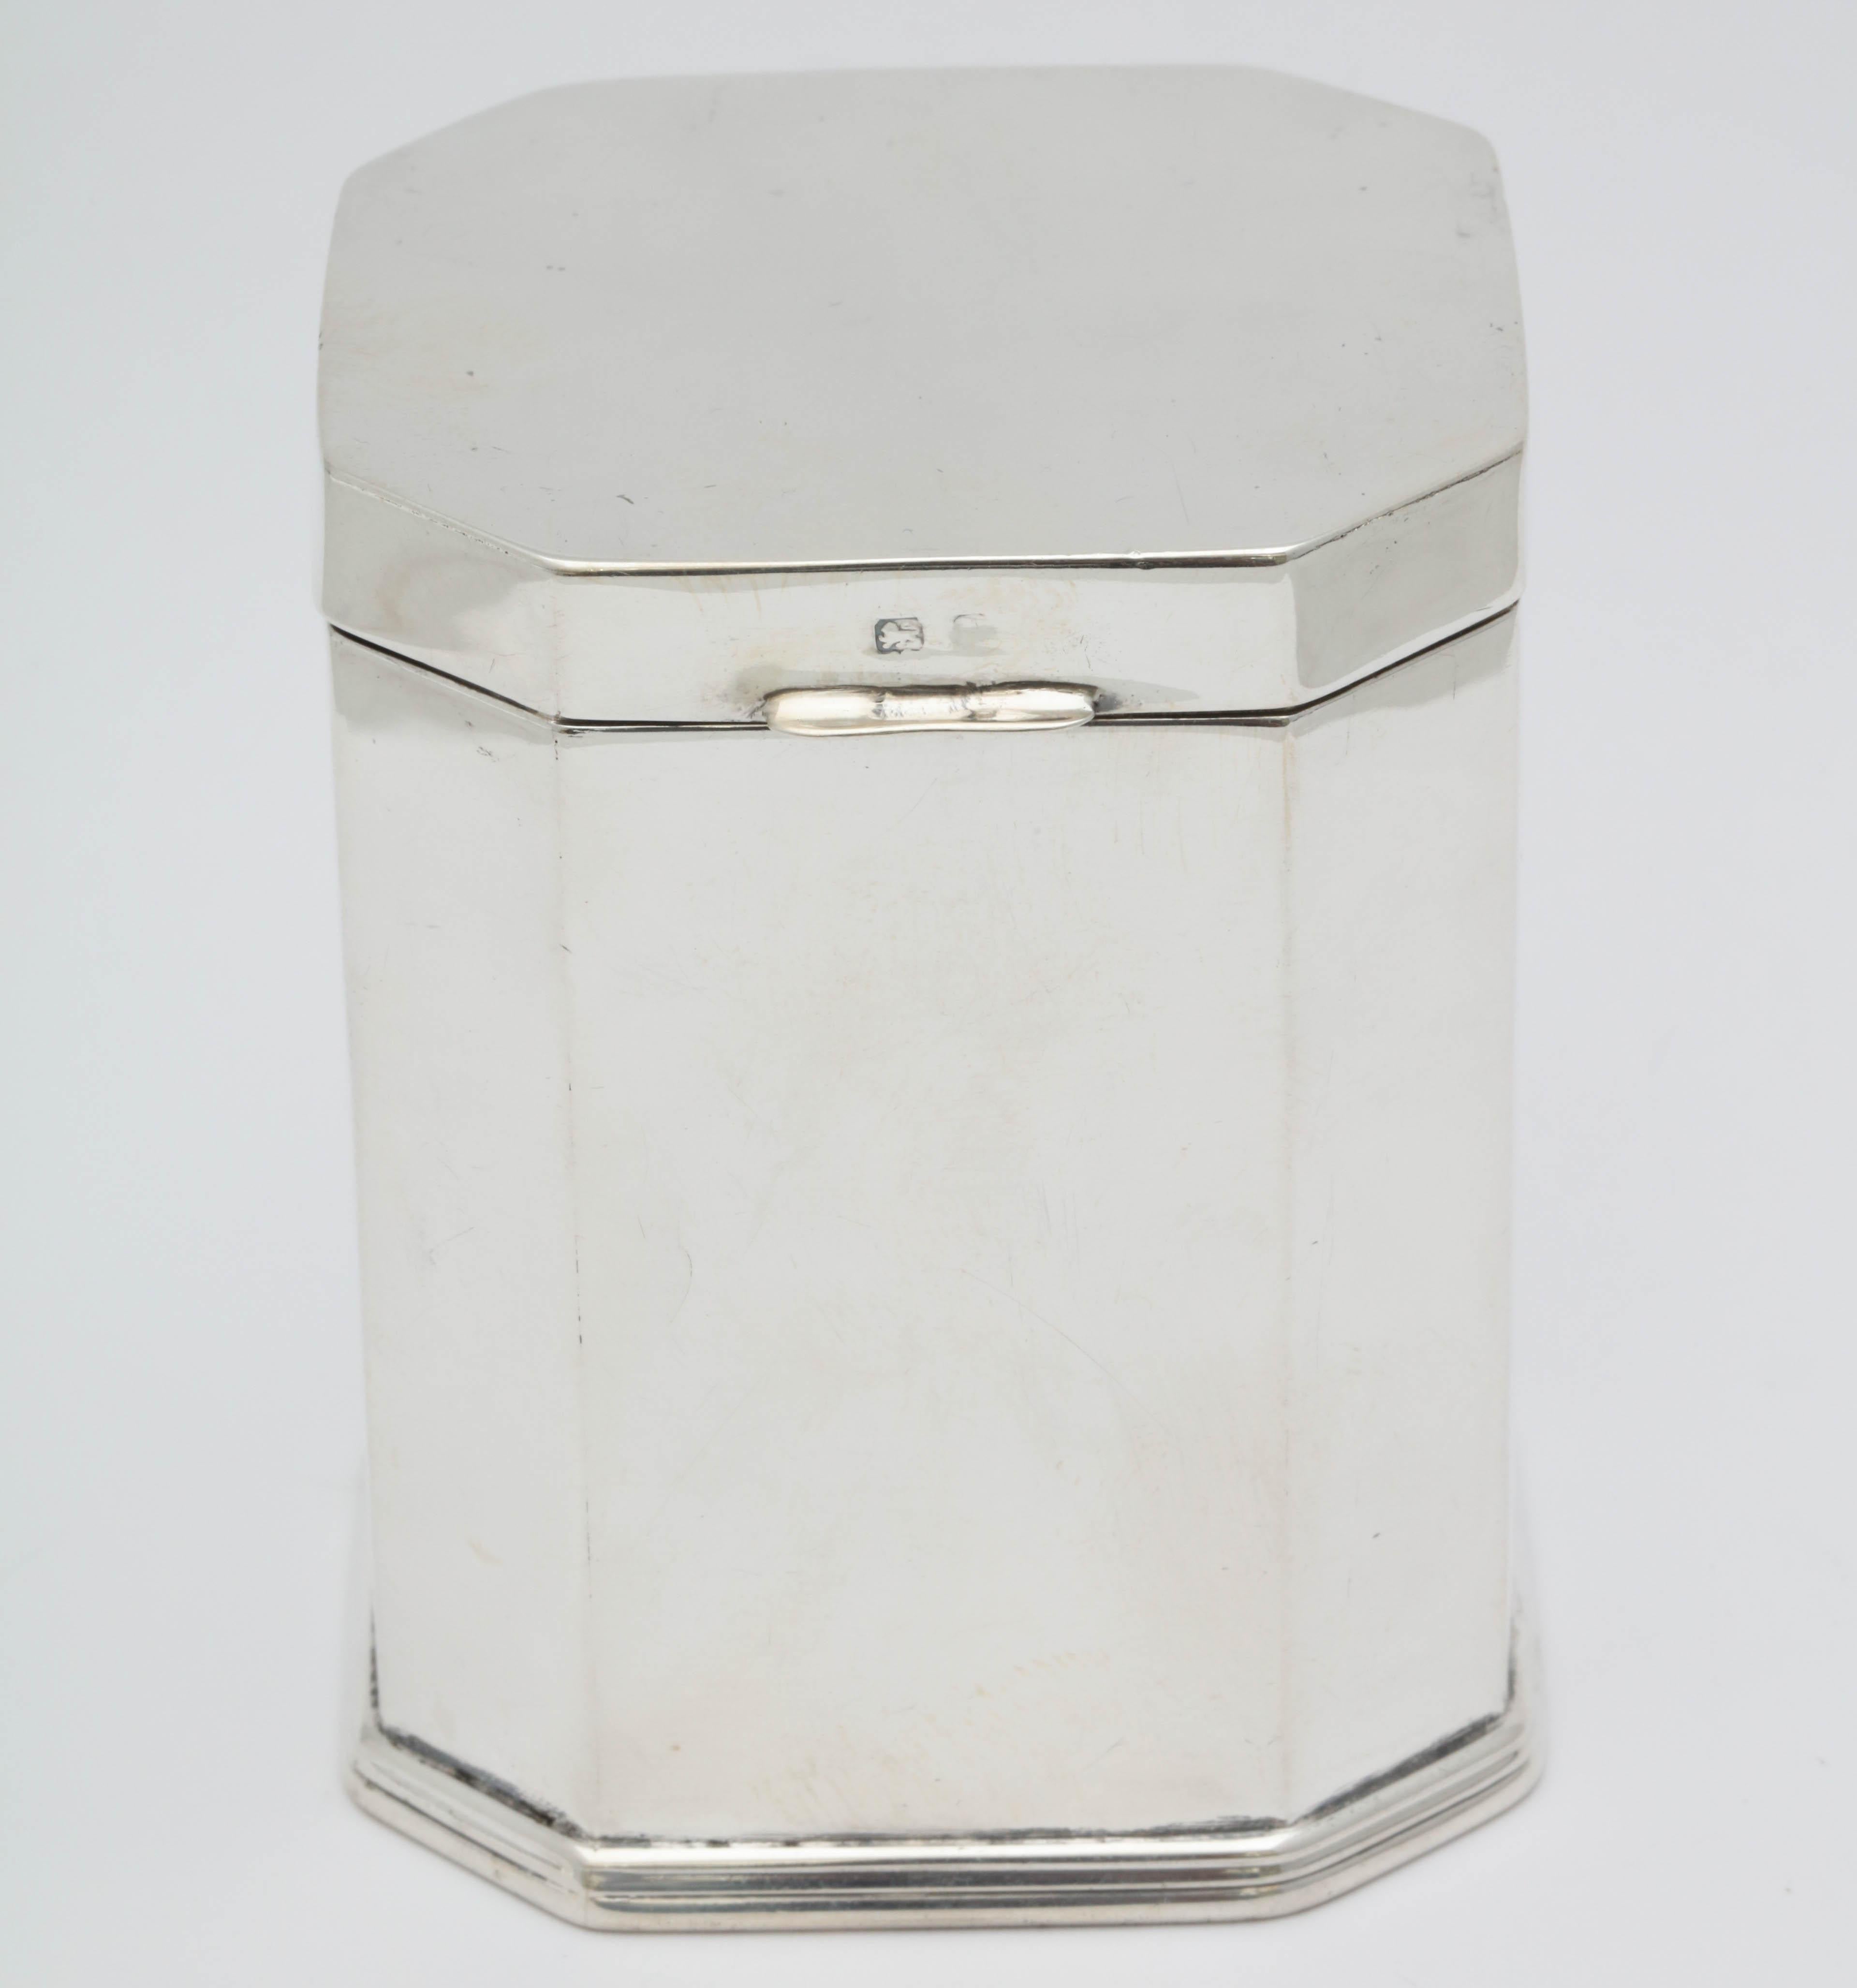 English Beautiful Edwardian Sterling Silver Tea Octagonal Caddy with Hinged Lid